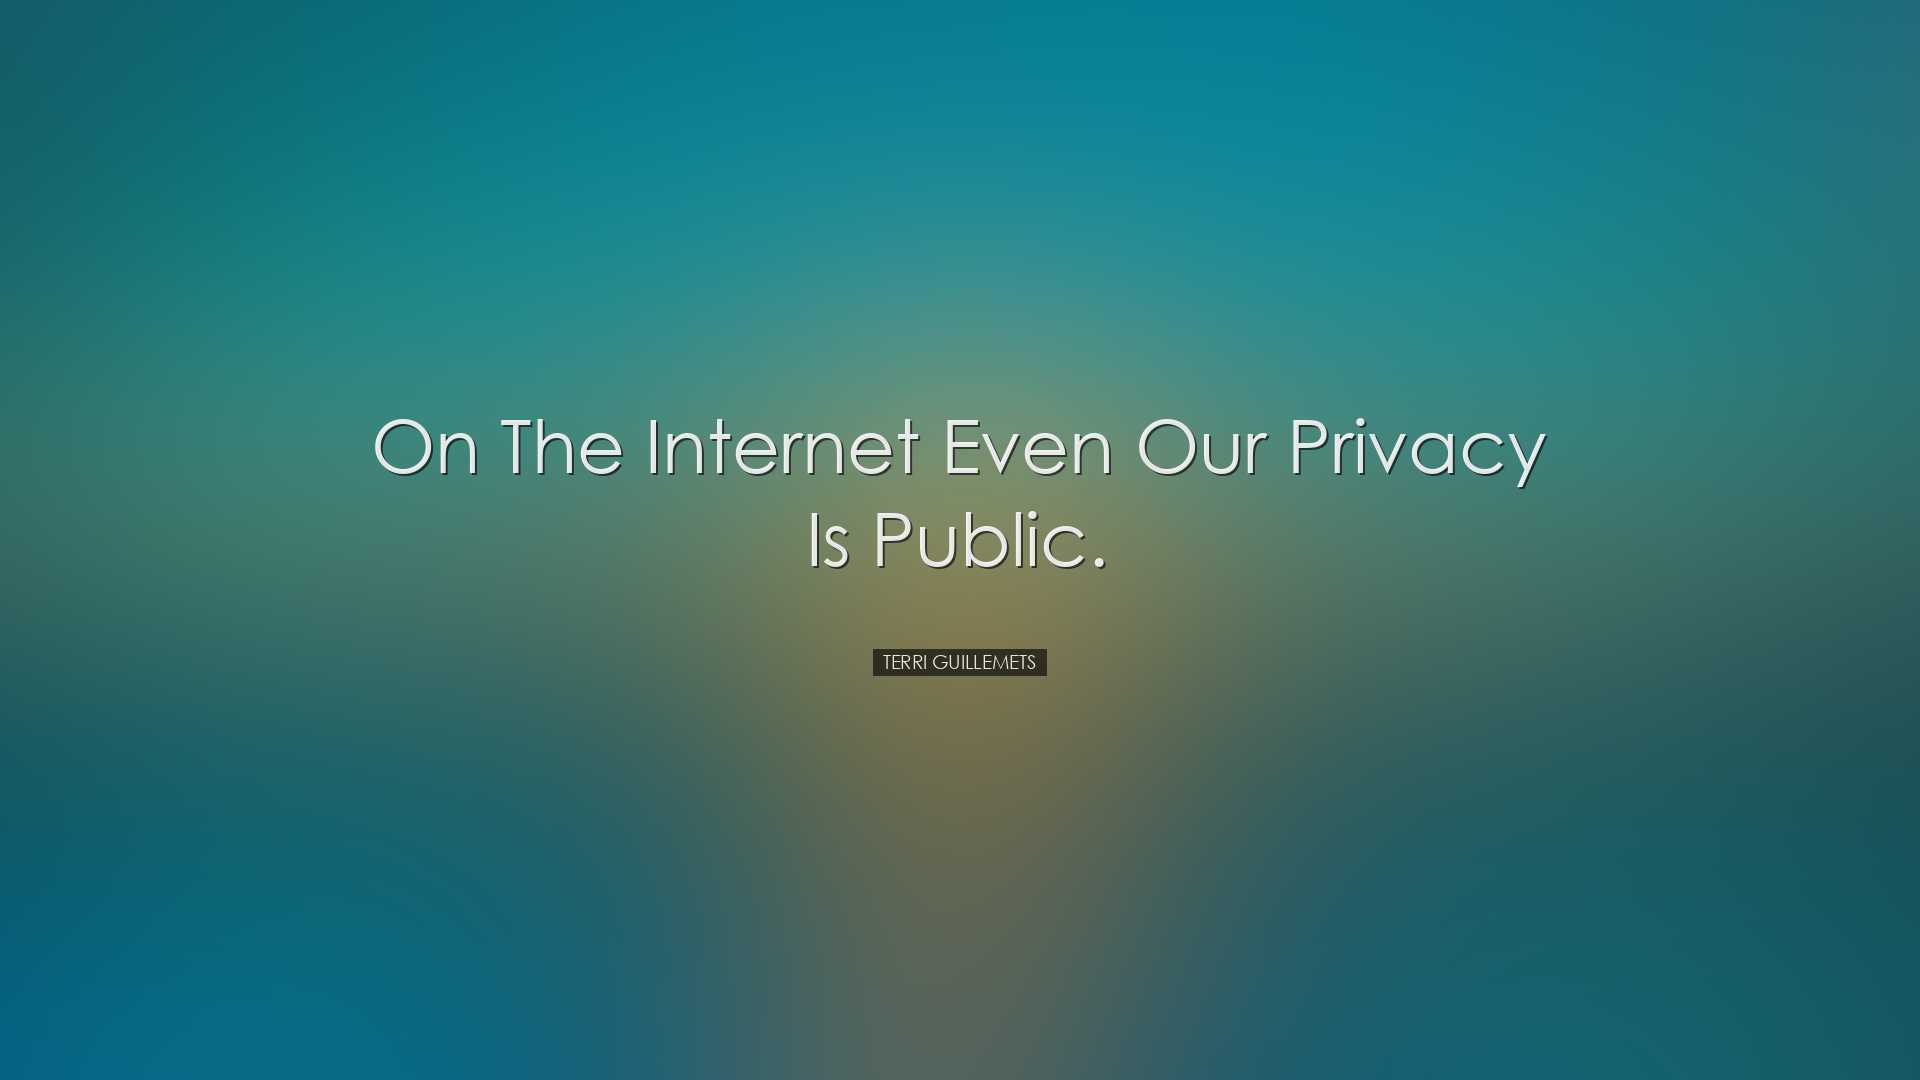 On the internet even our privacy is public. - Terri Guillemets